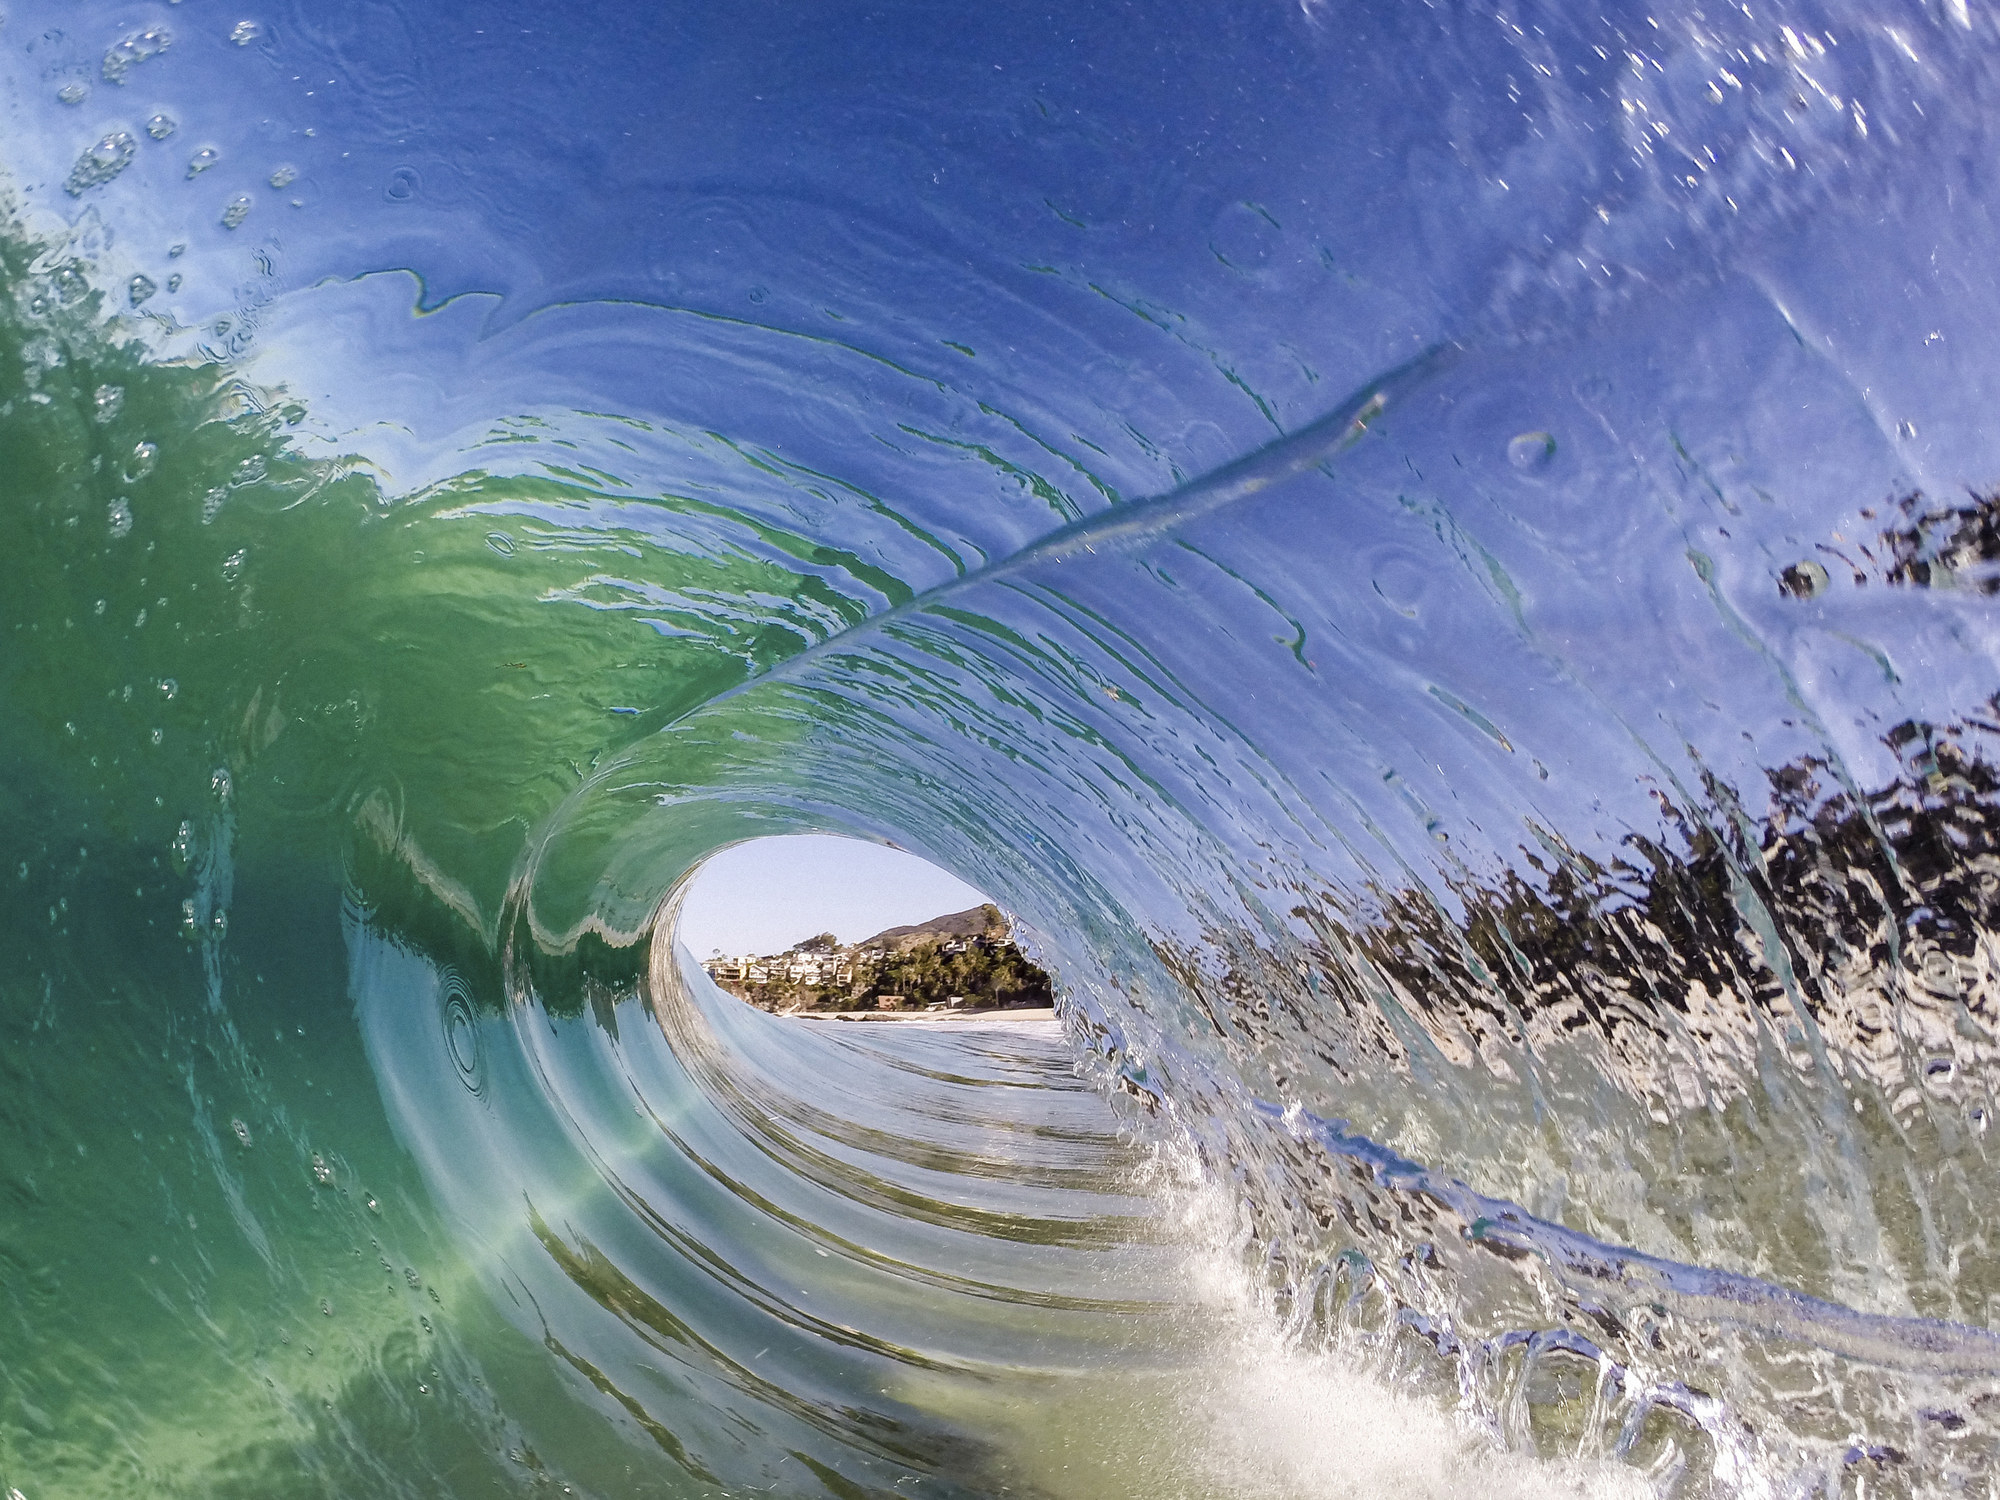 Photo of wave photographed from the barrel of the wave